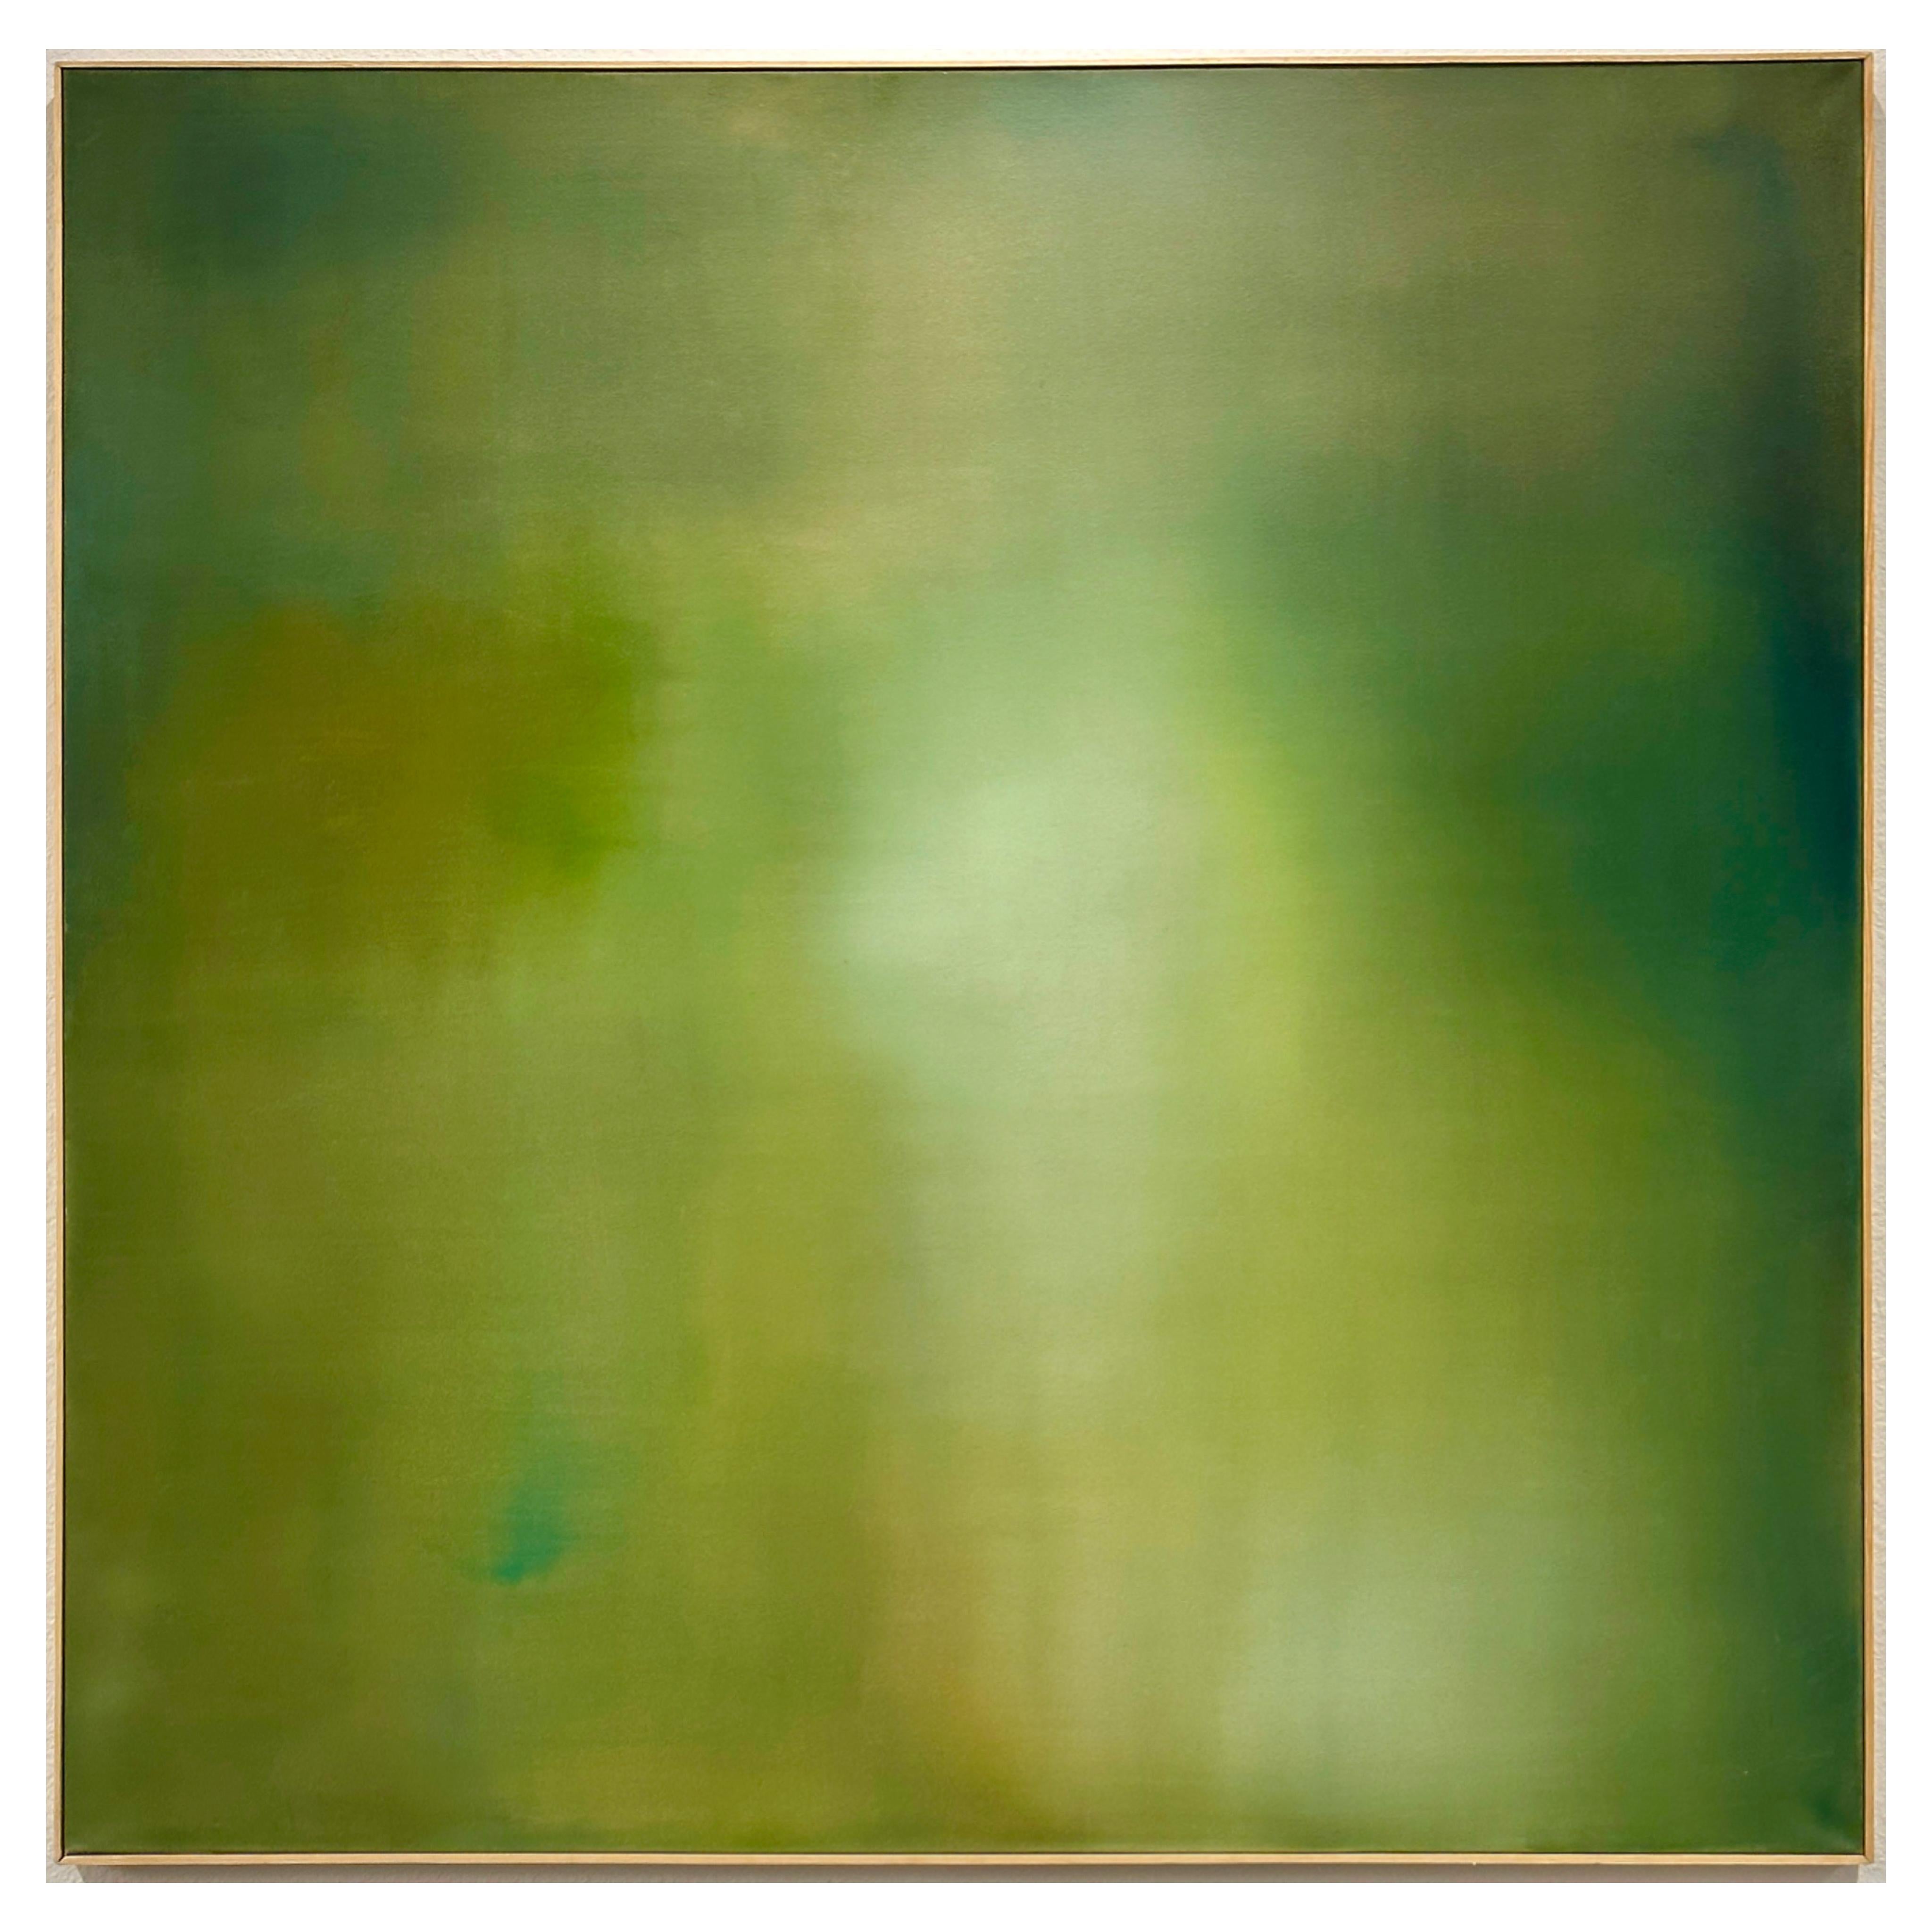 Robin Harker Large Green Abstract Oil on Canvas California Artist 2023.

Framed in natural wood artist frame. Edges are unfinished as it is expected that the buyer will have framed to their taste. 

Signed en verso.

DIMENSIONS:
48